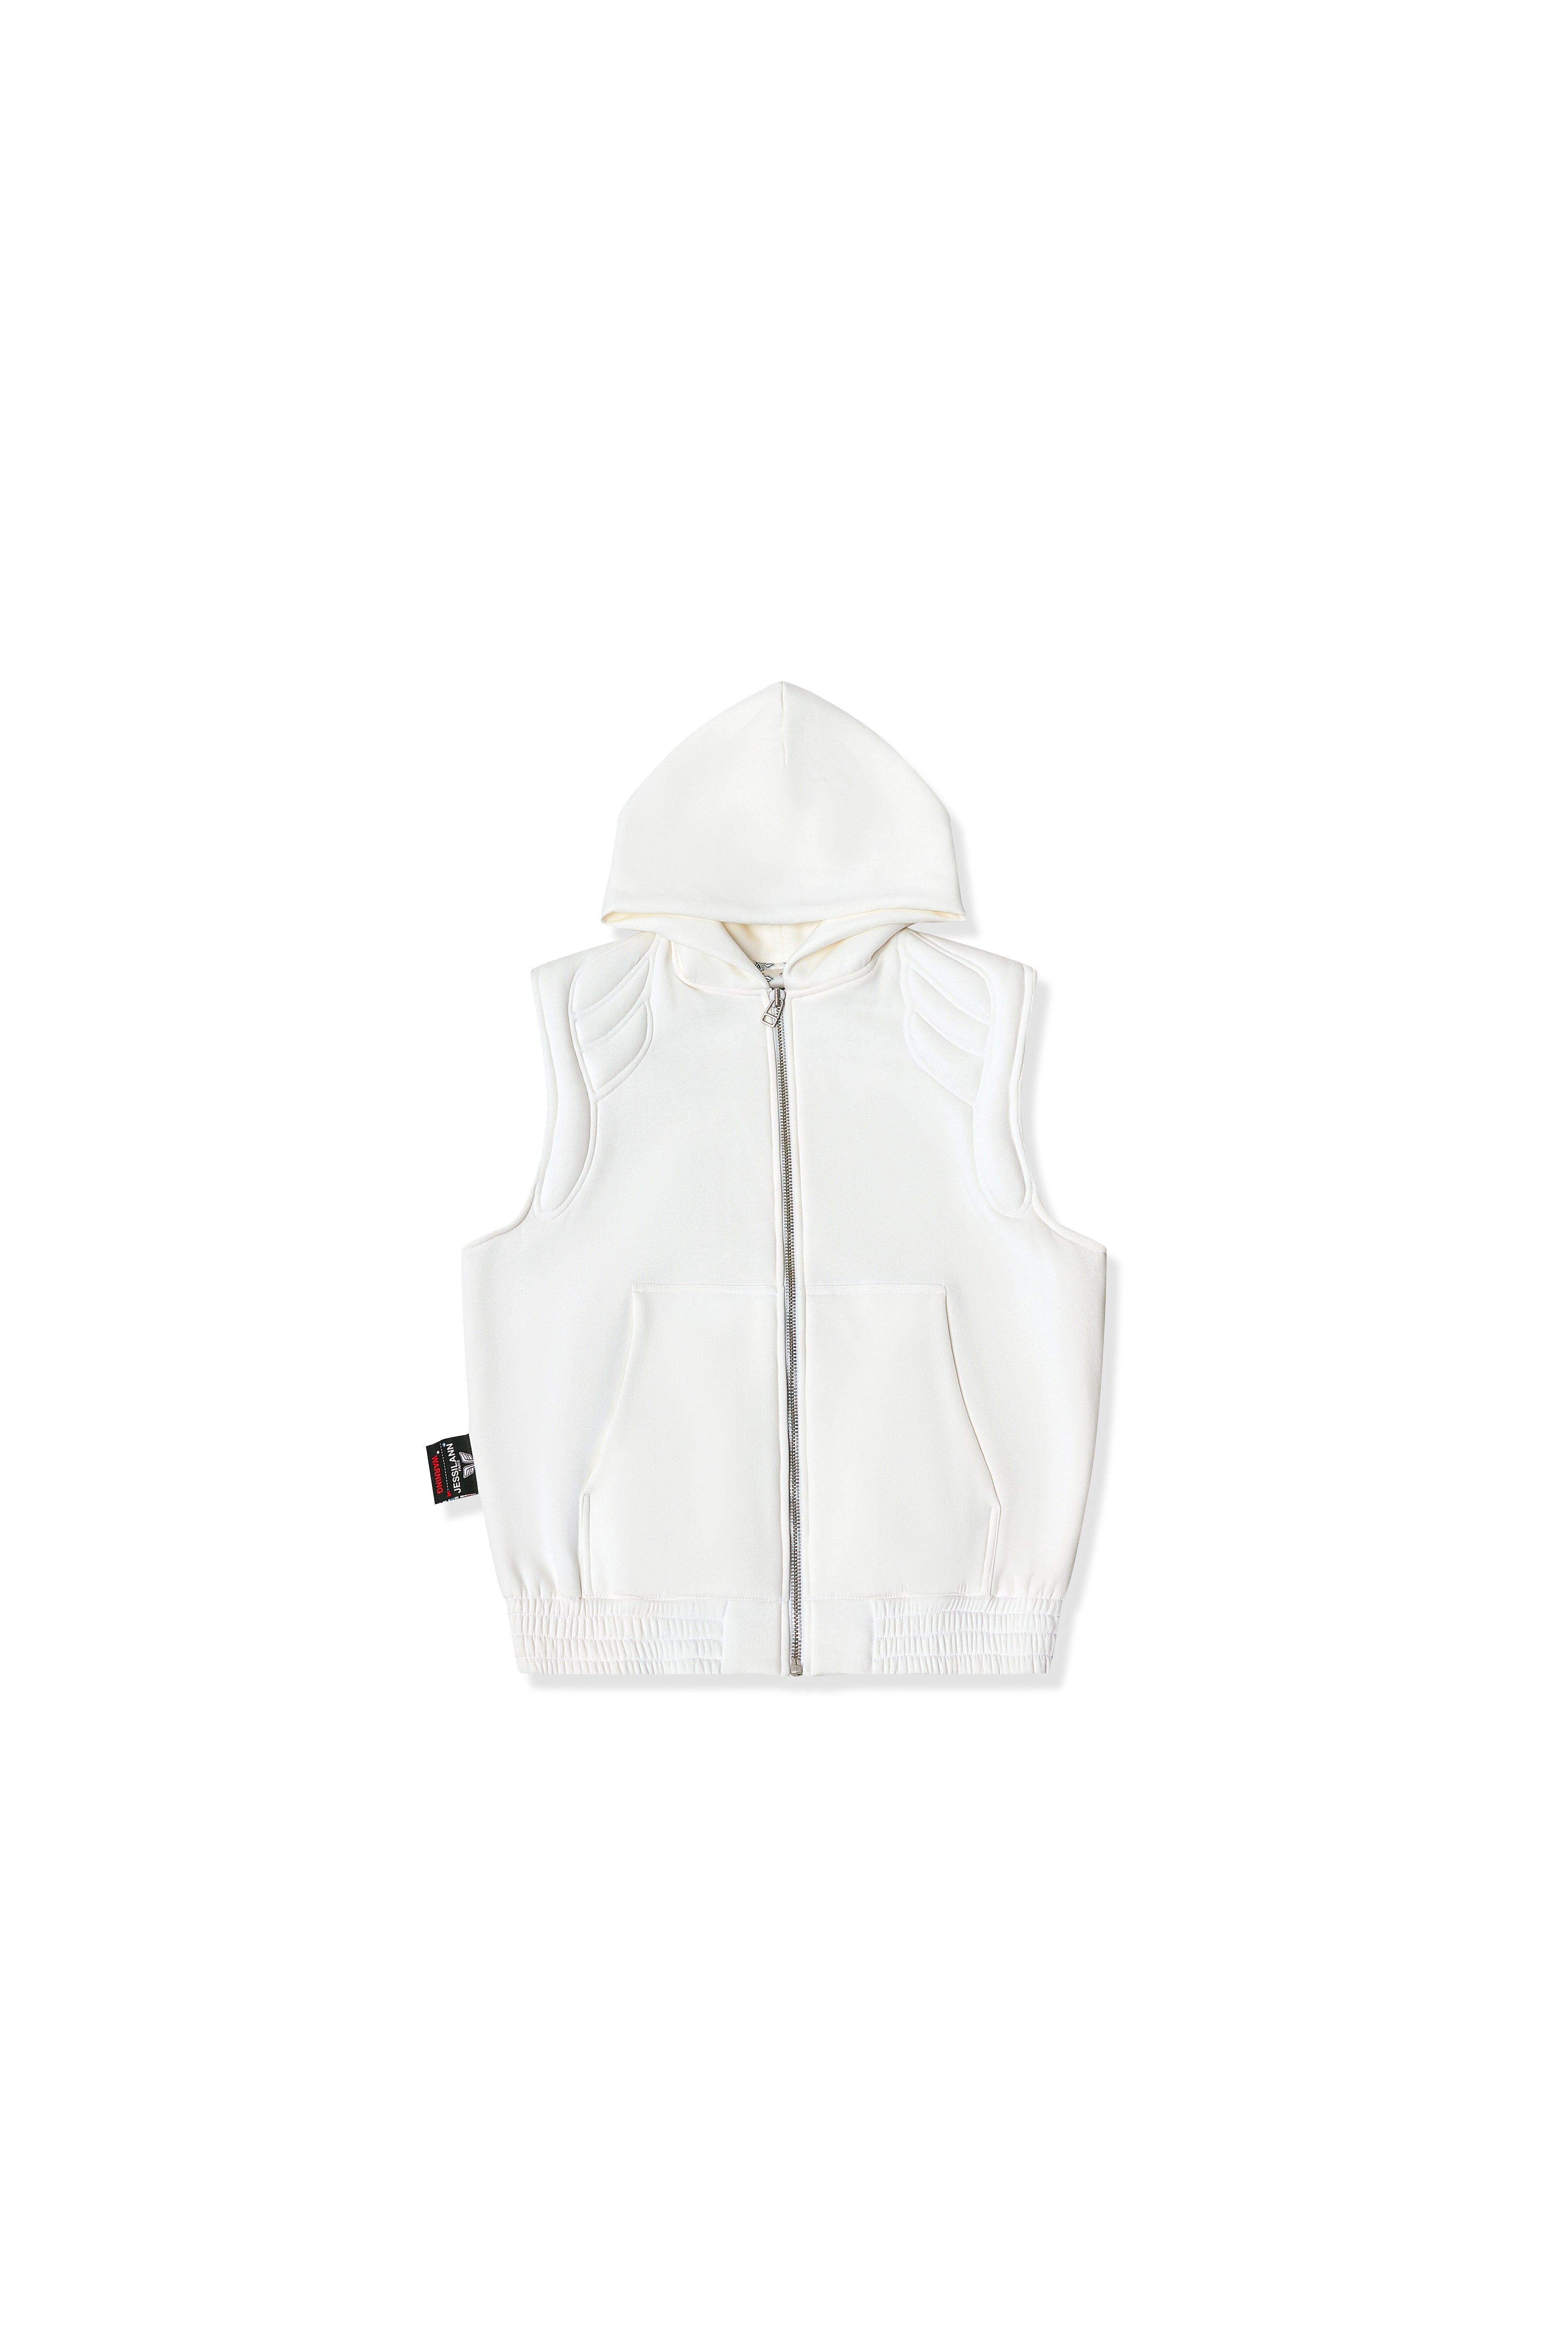 HOODIE OVERSIZE COUTURE WHITE